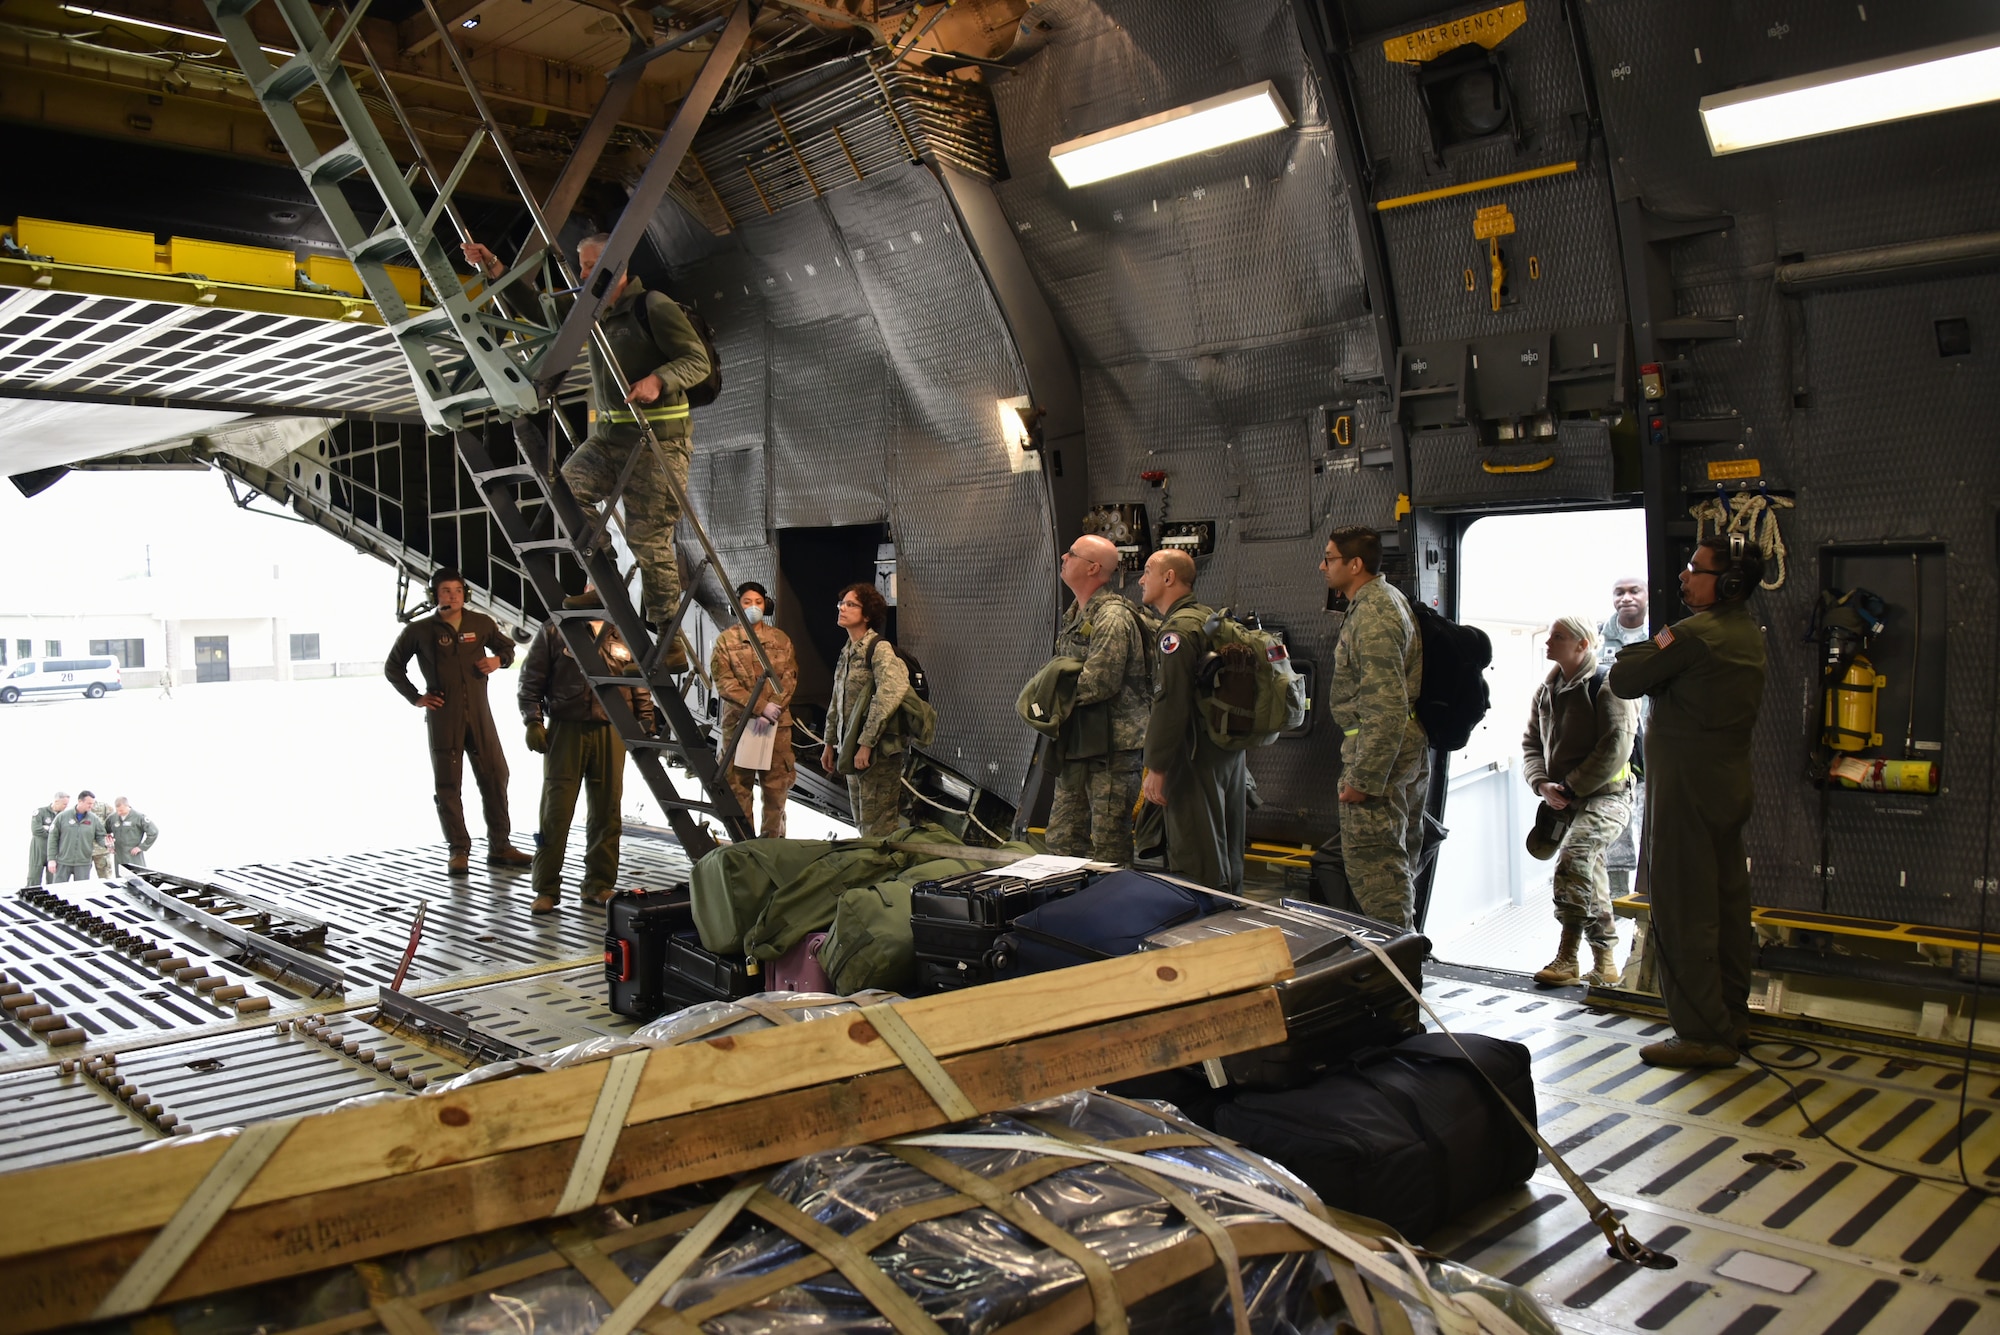 Deploying Airmen from the 301st Fighter Wing Medical Squadron board a C-5M Super Galaxy at U.S. Naval Air Station Joint Reserve Base, Fort Worth, Texas on April 5, 2020. This deployment is part of a larger mobilization package of more than 120 doctors, nurses, and respiratory technicians Air Force Reserve units across the nation provided over the past 48 hours of COVID-19 response to take care of Americans. (U.S. Air Force photos by Capt. Jessica Gross and Tech. Sgt. Melissa Harvey)